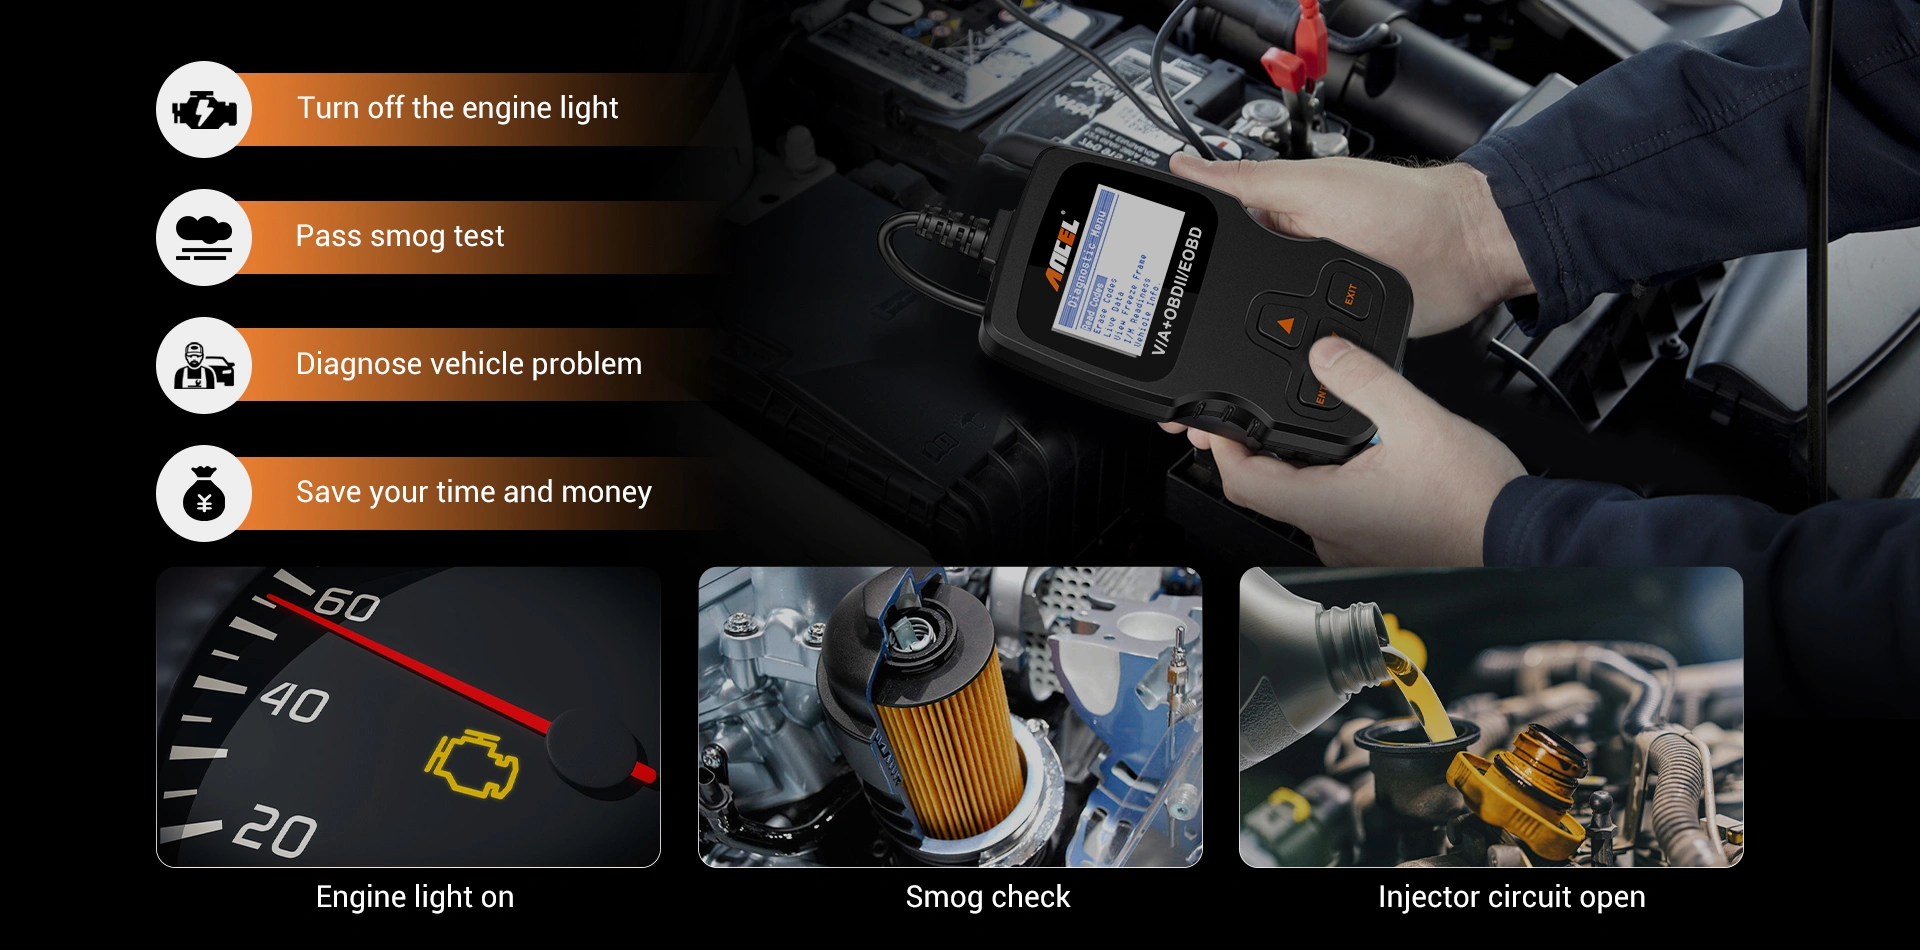 Why do you need an OBD scanner?